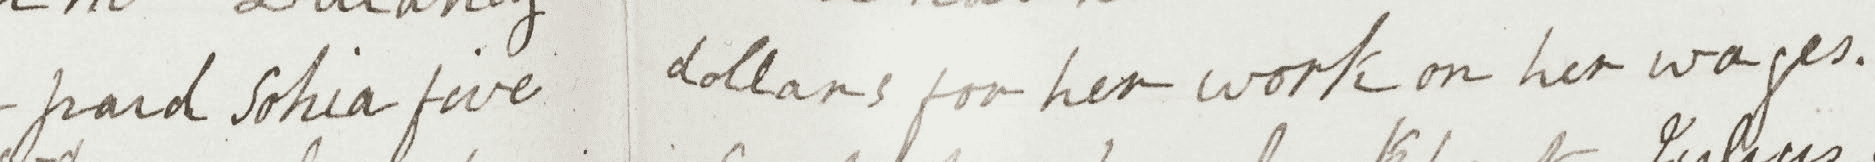 paid Sophia five dollars for her work 26 February 1866